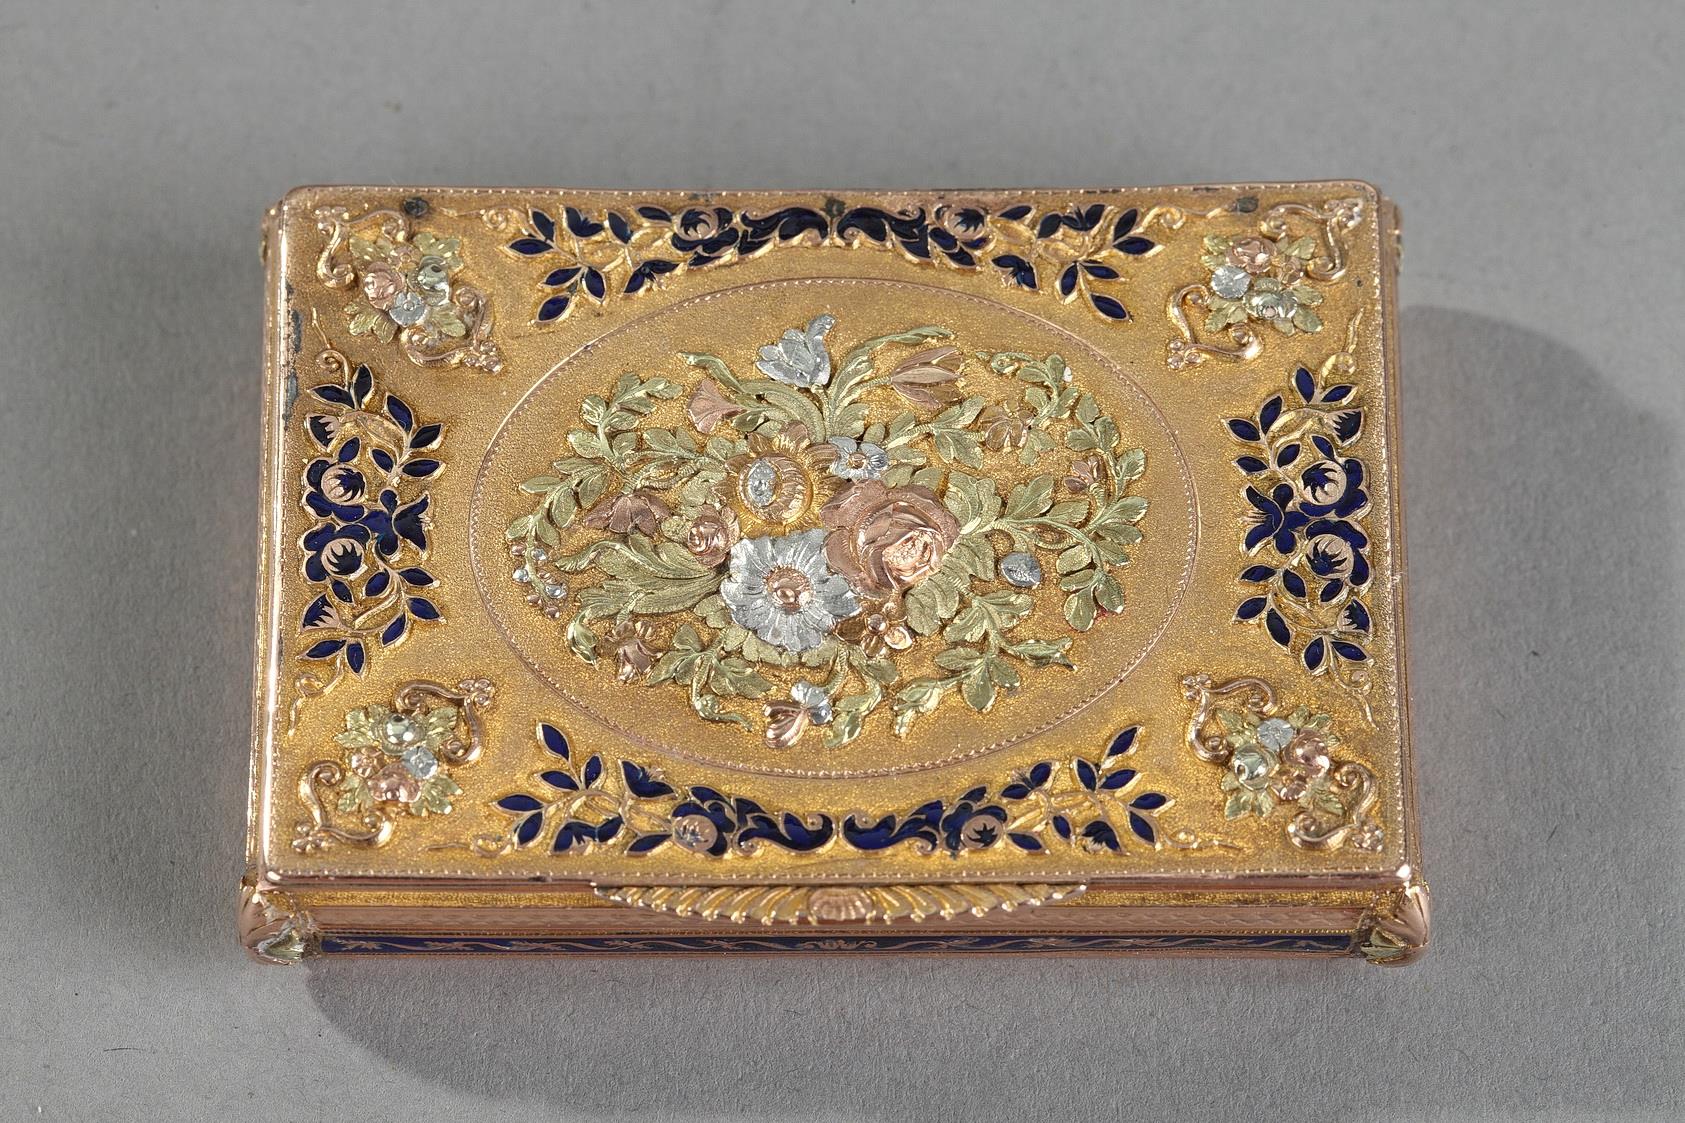 Early 19th gold and enamel box. Swiss work